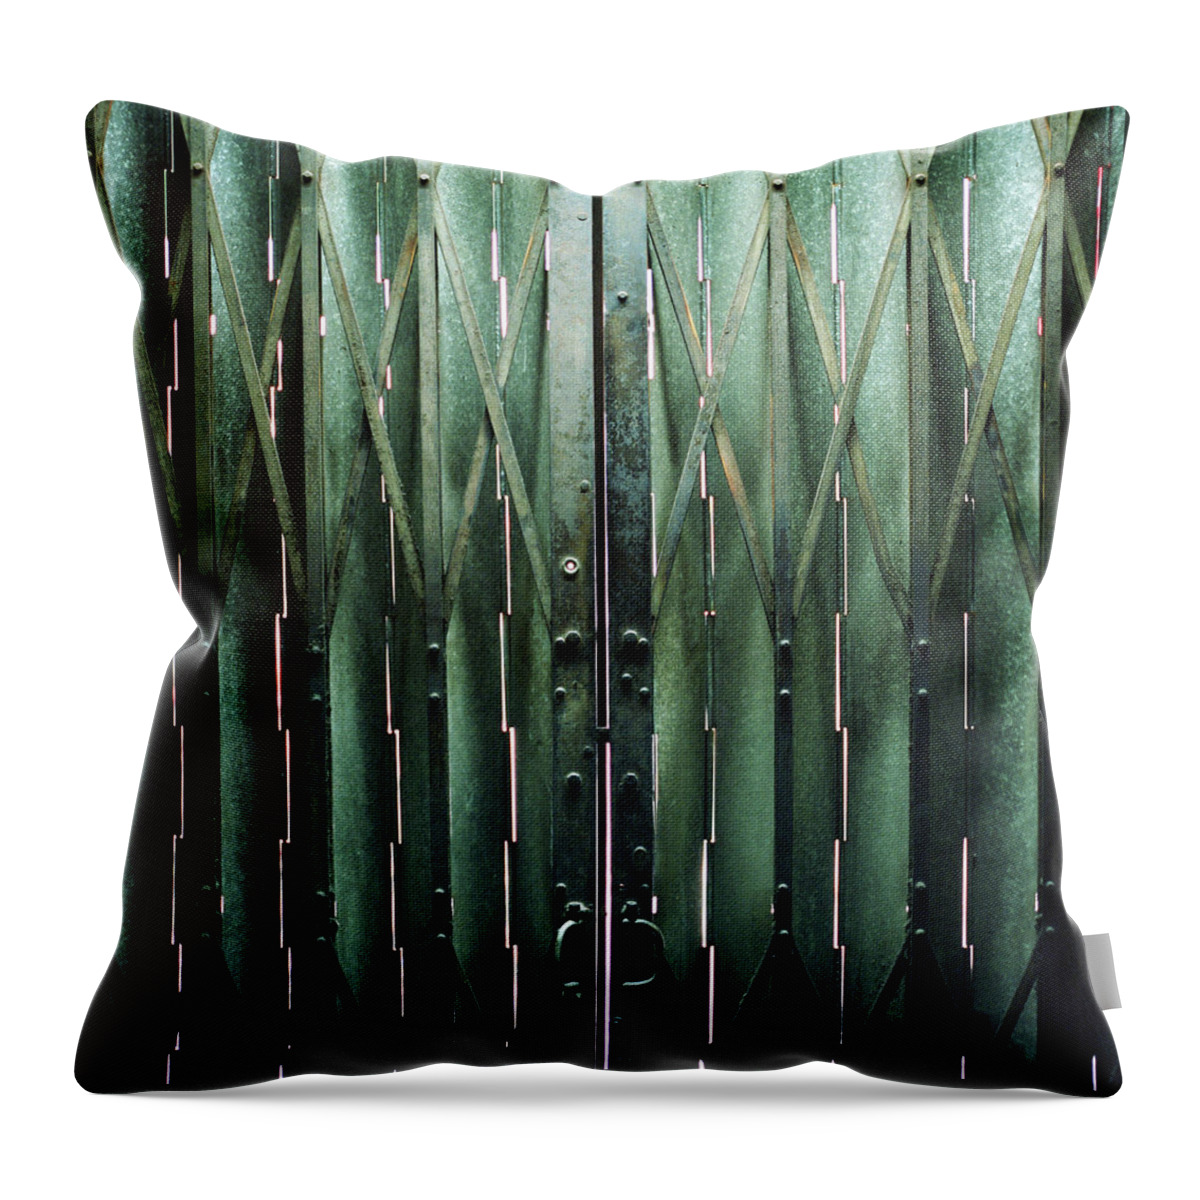 Shutter Throw Pillow featuring the photograph A Greenish Steel Gate Of A 50 Years Old by Kevin Liu